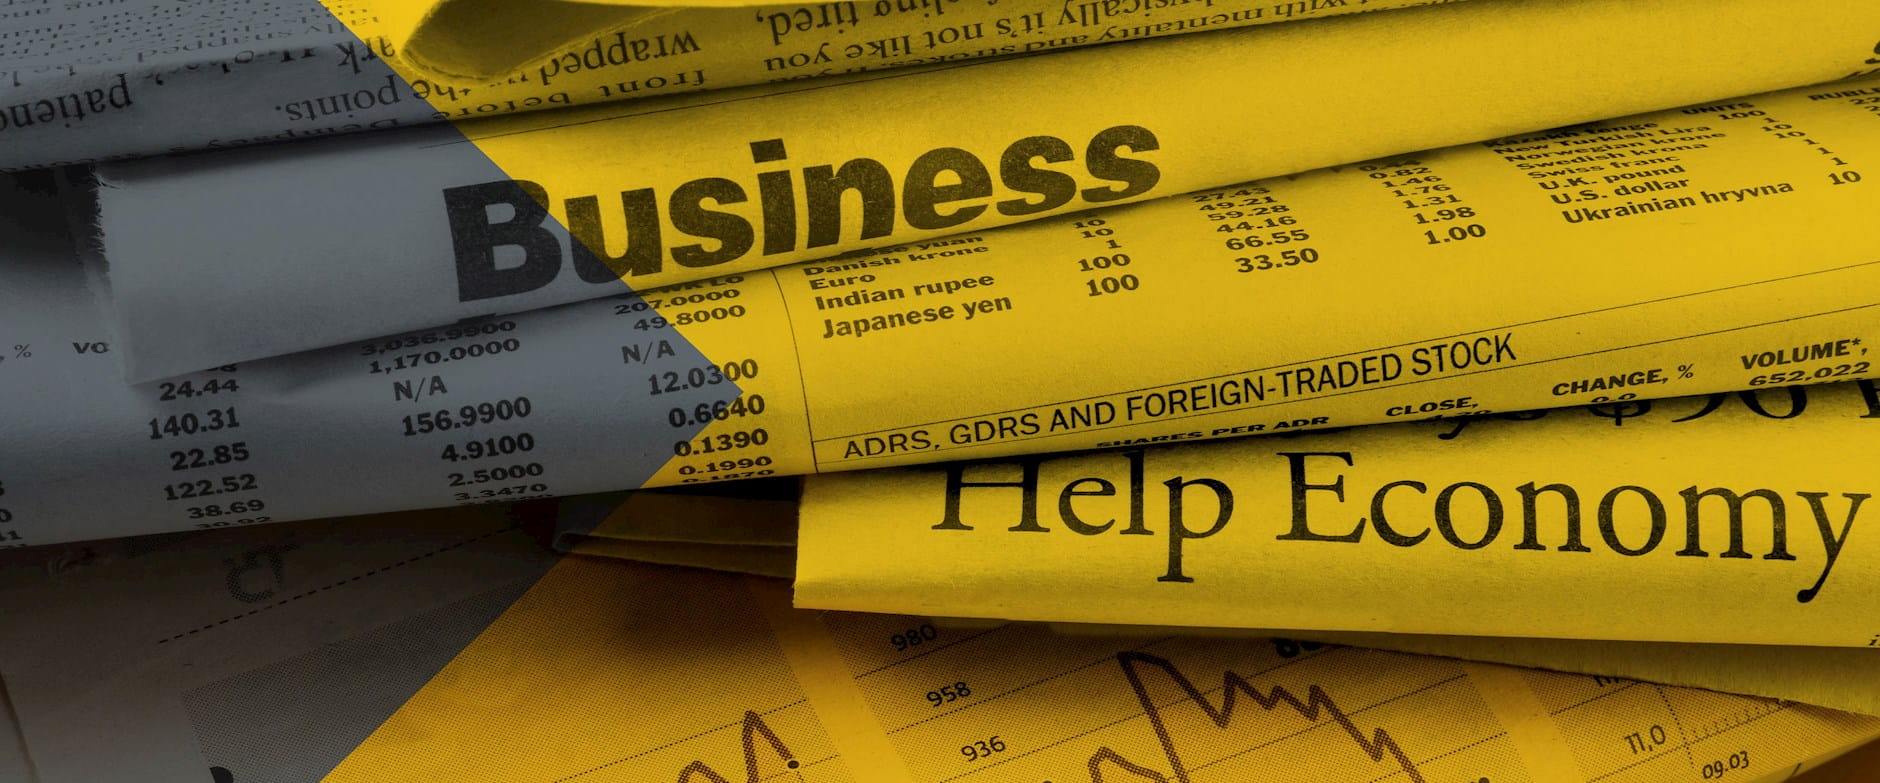 A pile of economic newspapers with headlines like "Business" and "Help Economy"